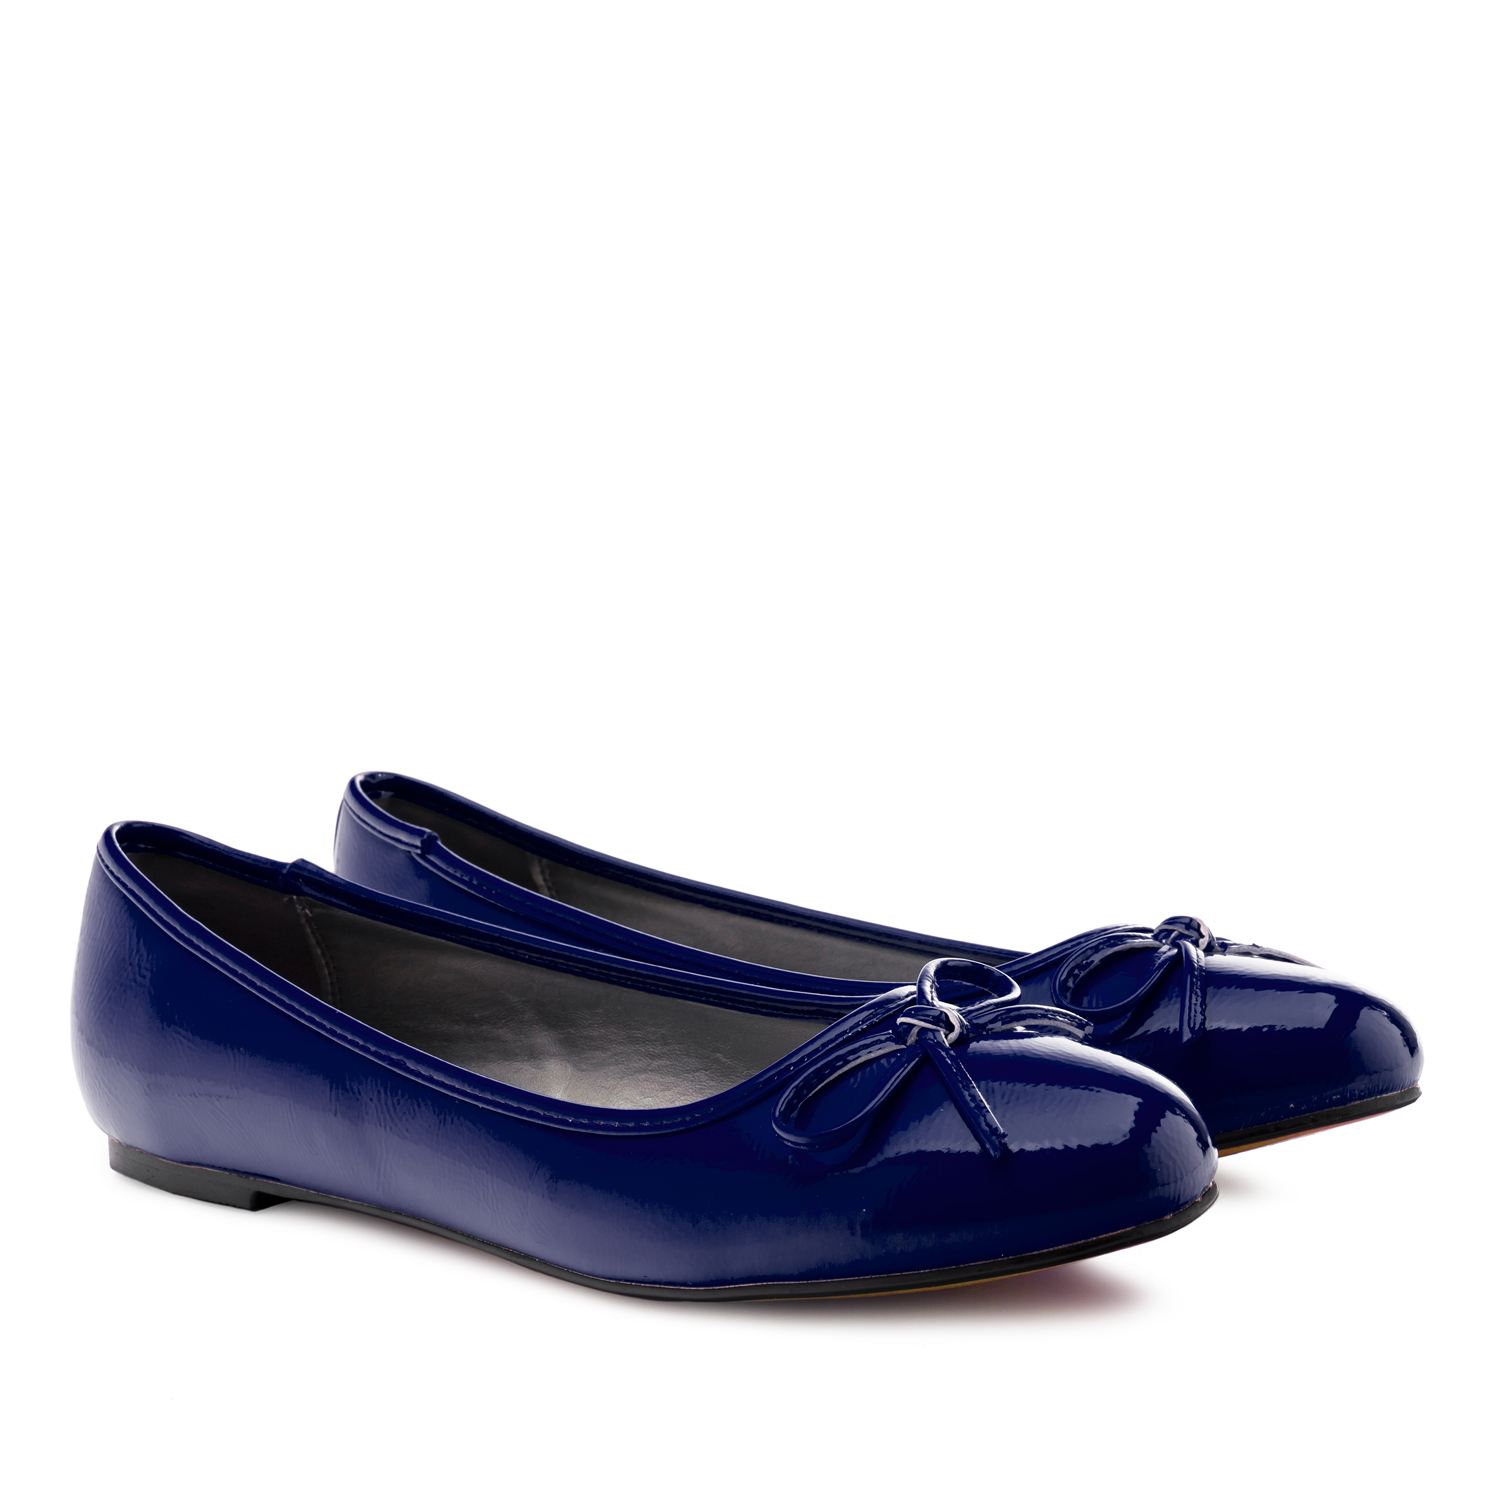 Blue faux-patent leather Ballerinas with bow. 